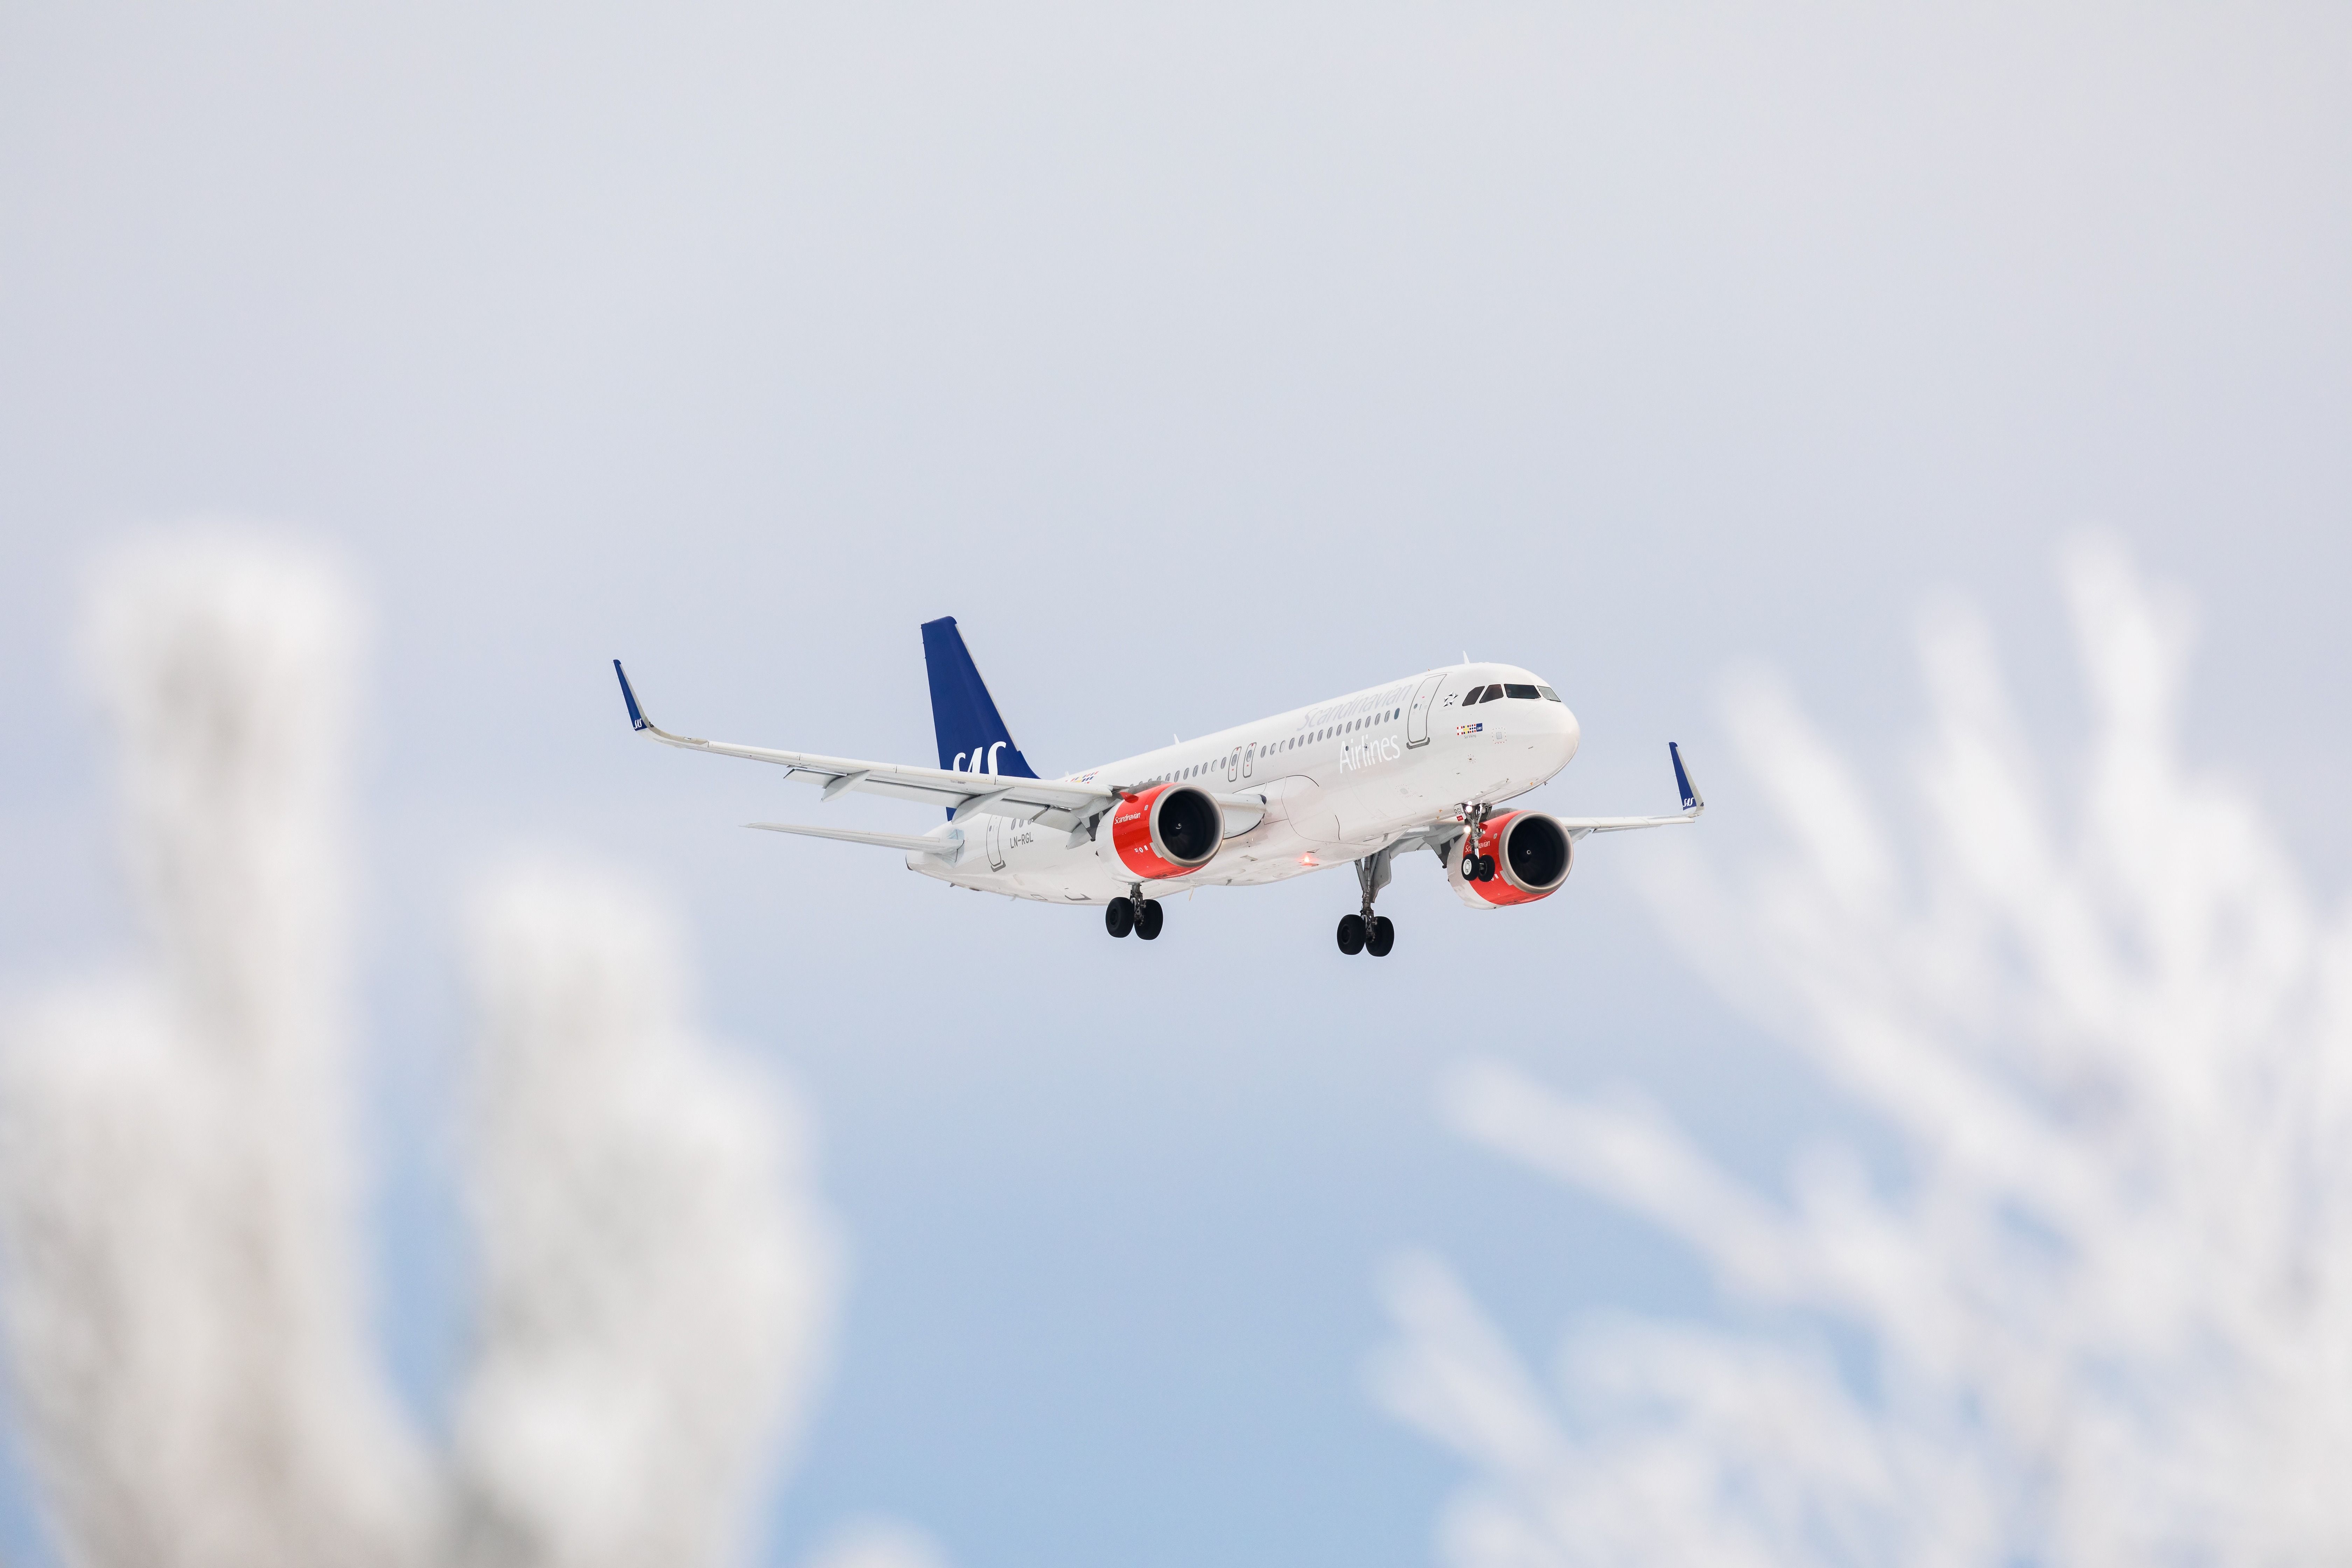 Flypix Scandinavian airlines (SAS) A320NEO coming in to land in with snowy trees in foreground (1)